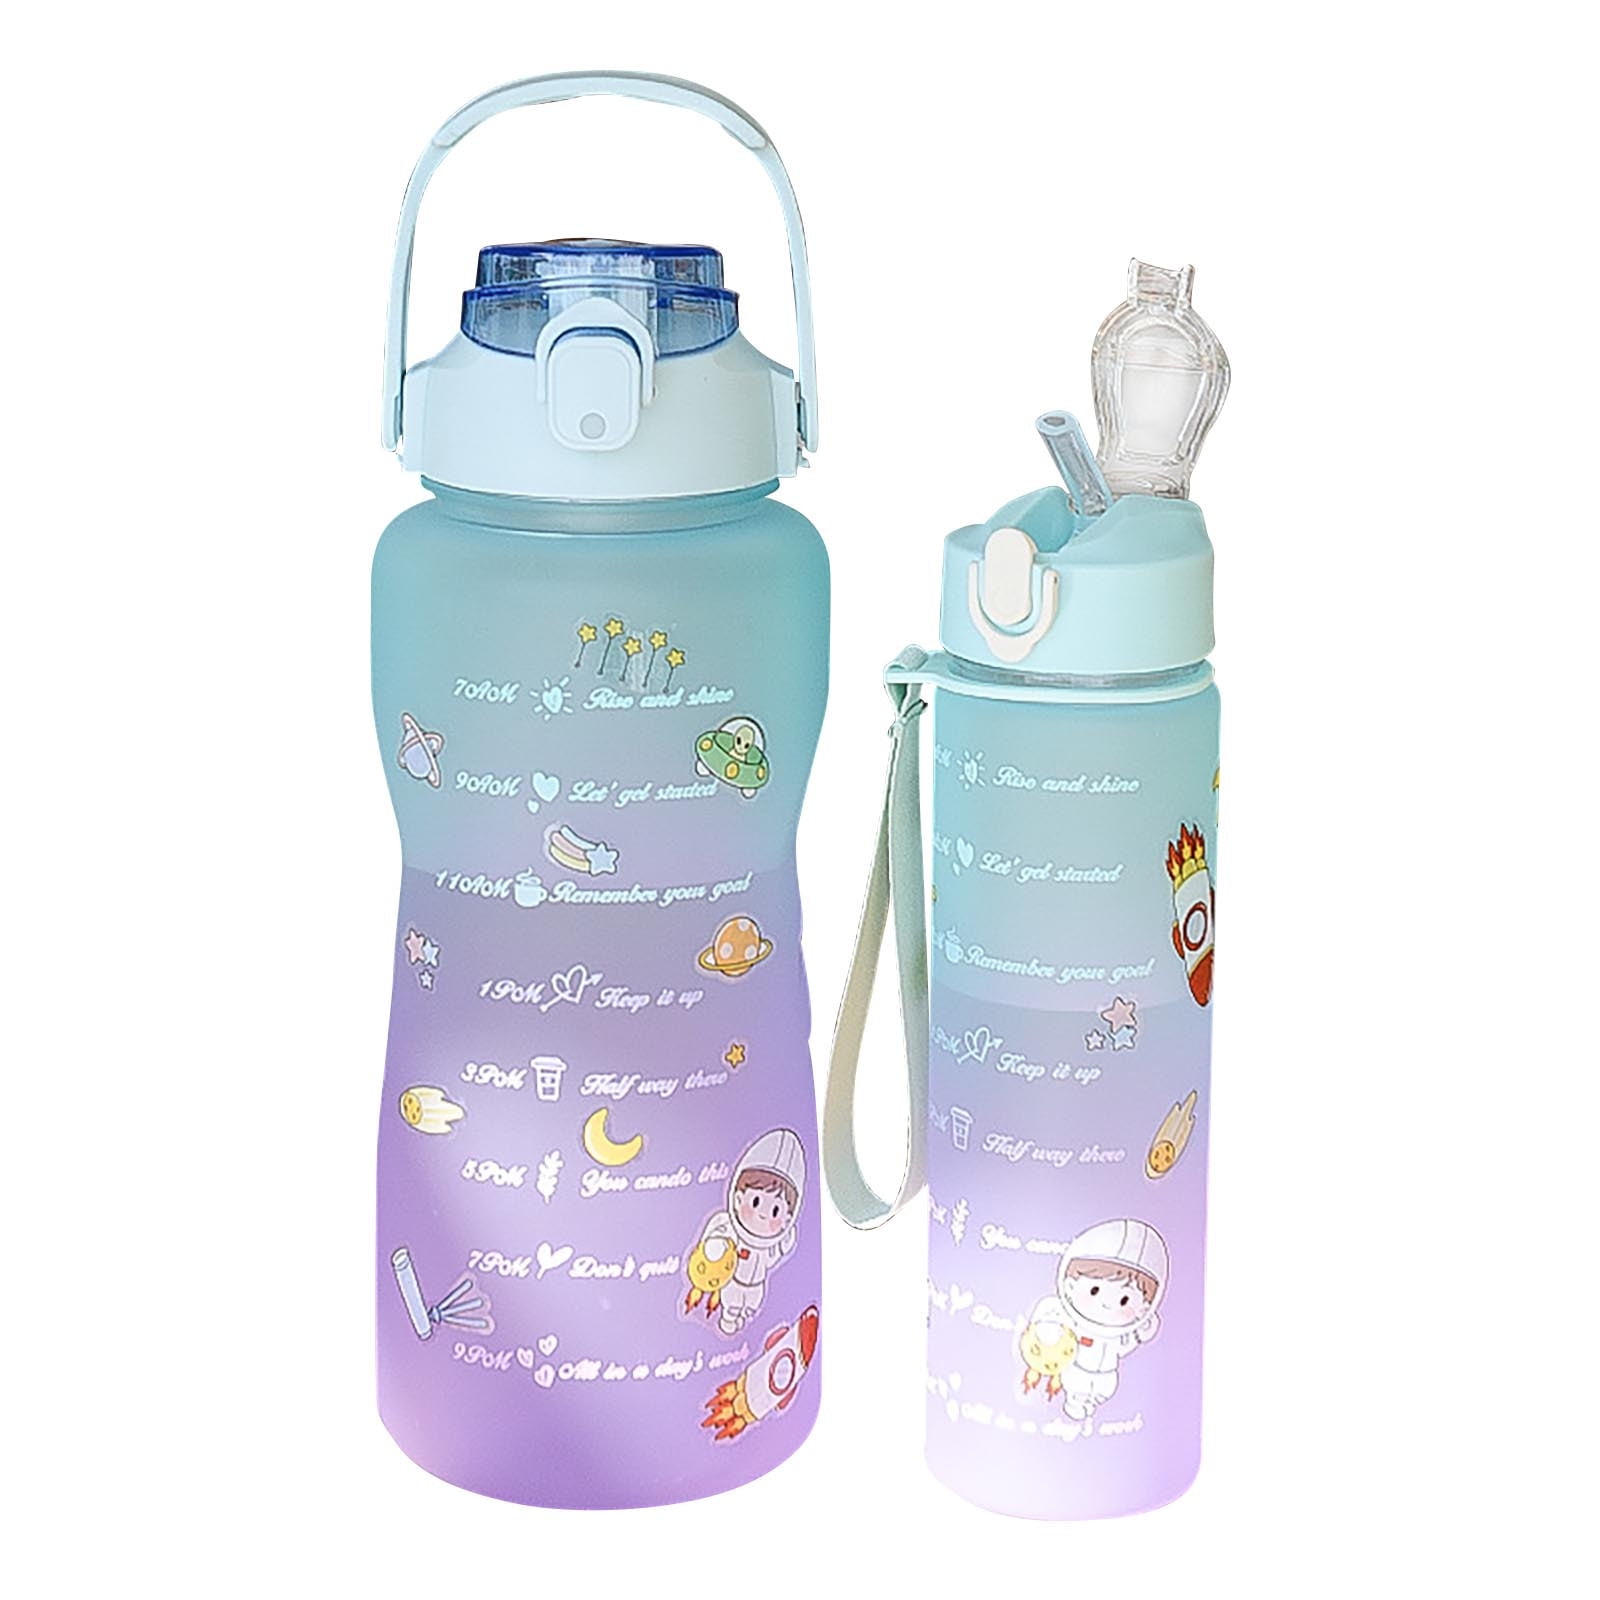 Air Up Scent Water Bottle With Measurements With Sticky Pods And Sugar  Carry Strap For Gym, Fitness, Outdoor Sports, Hiking Drop Delivery  Available DH2Av From Backpackboyzhome, $1.21